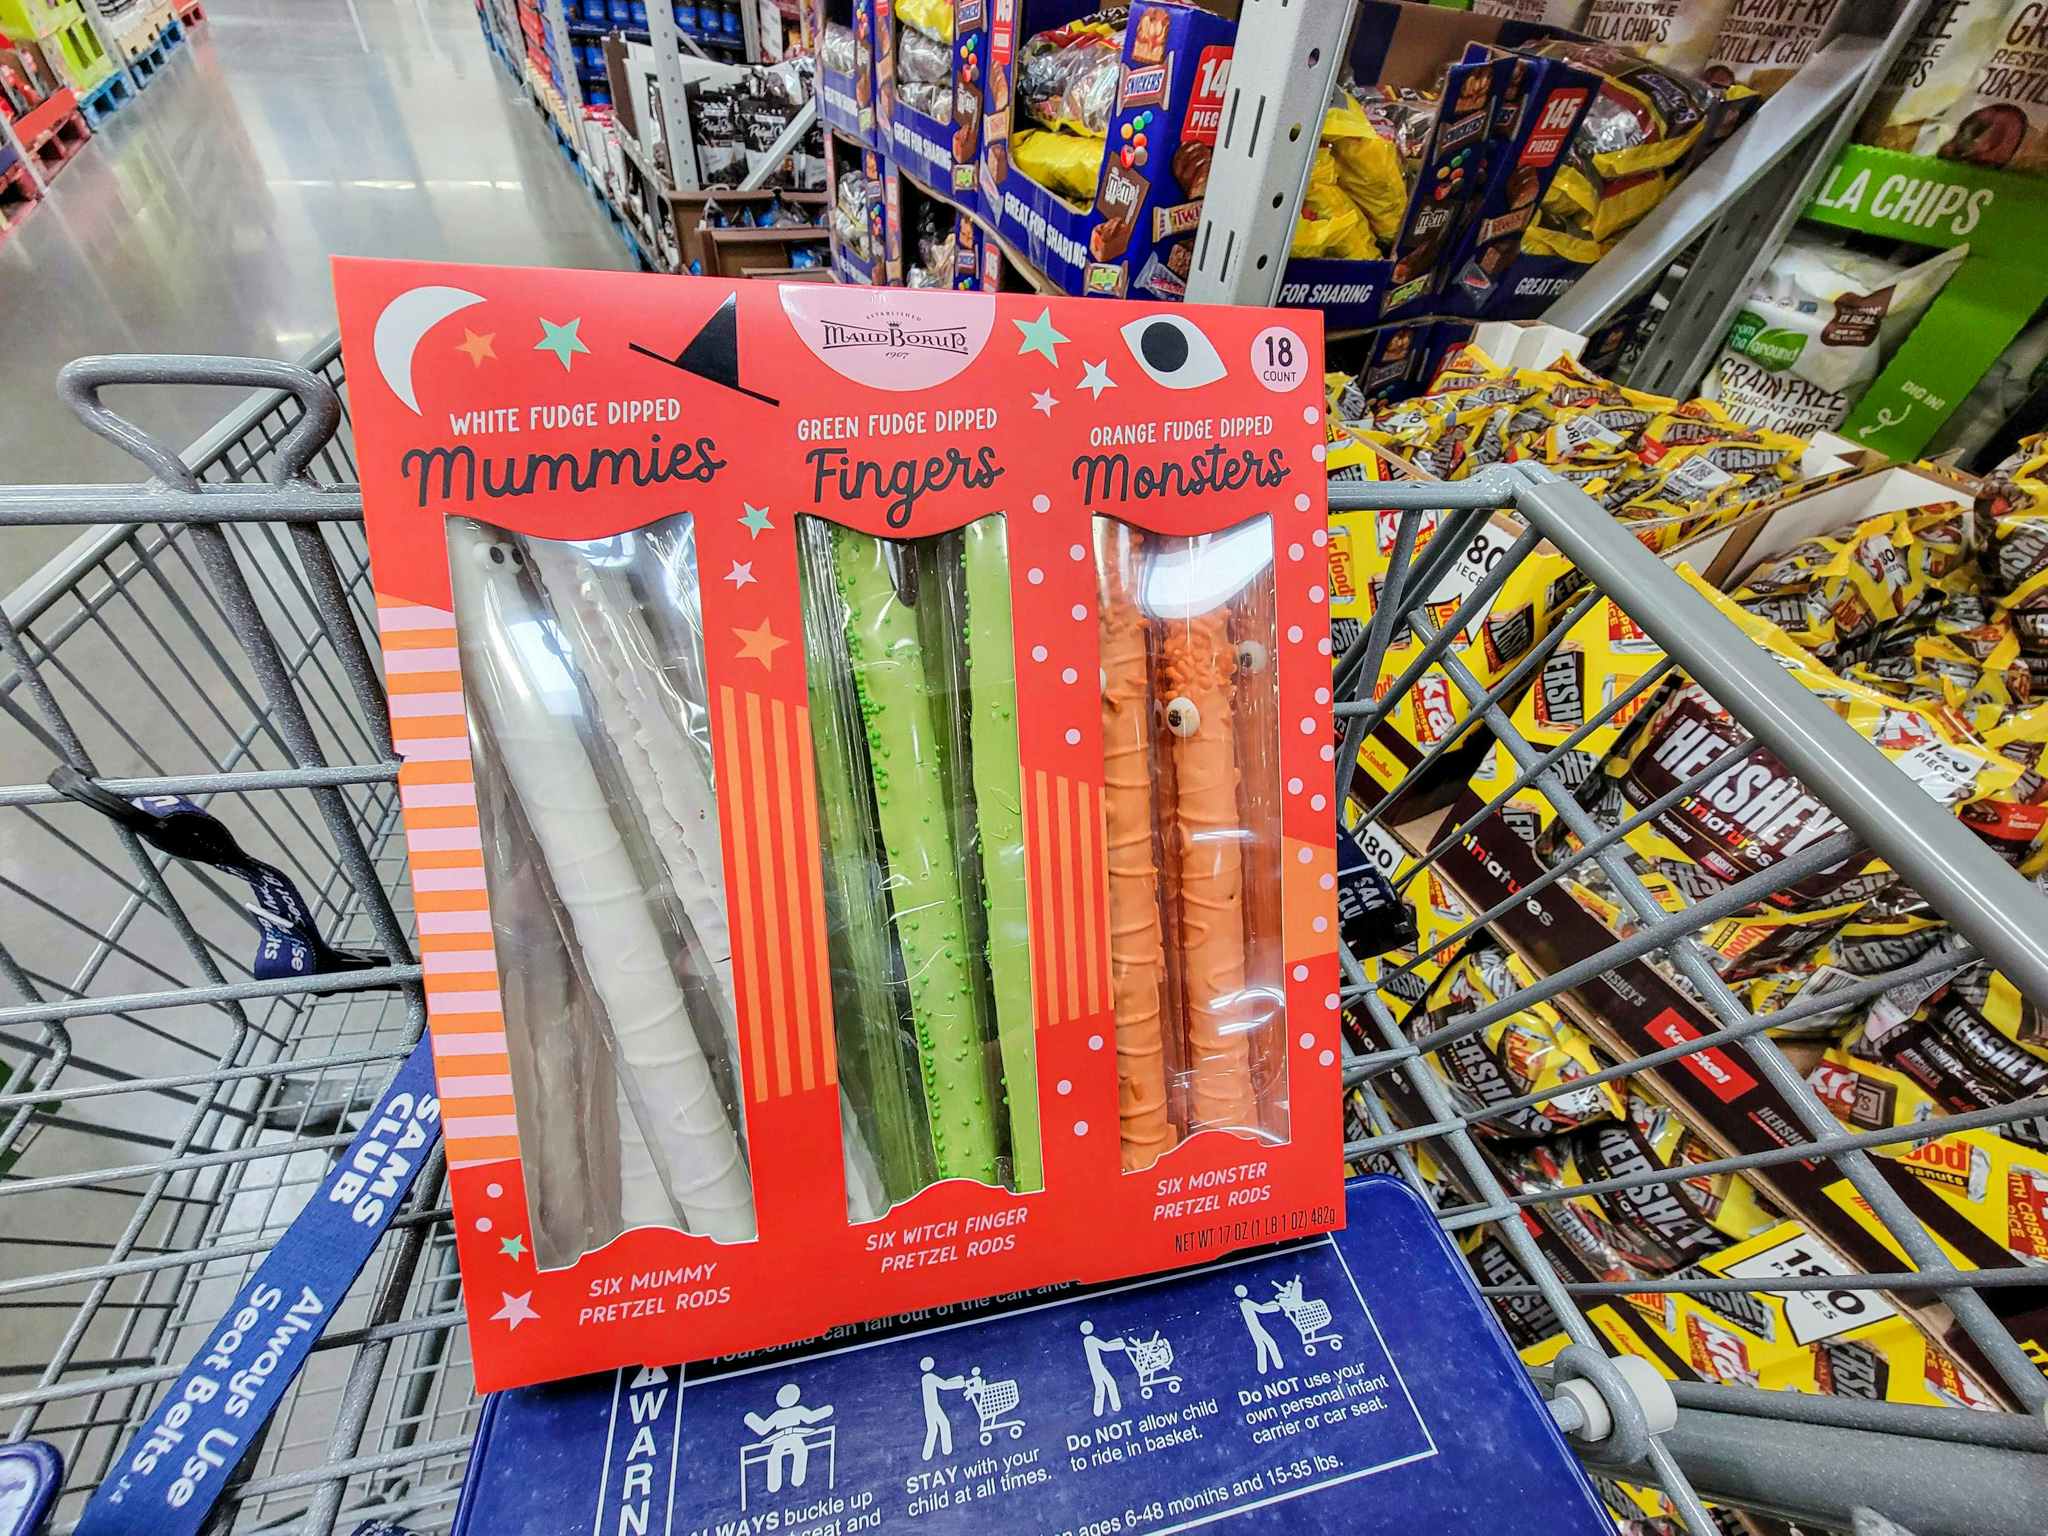 a box of halloween decorated pretzel rods in a cart, decorated as mummies, fingers, and monsters